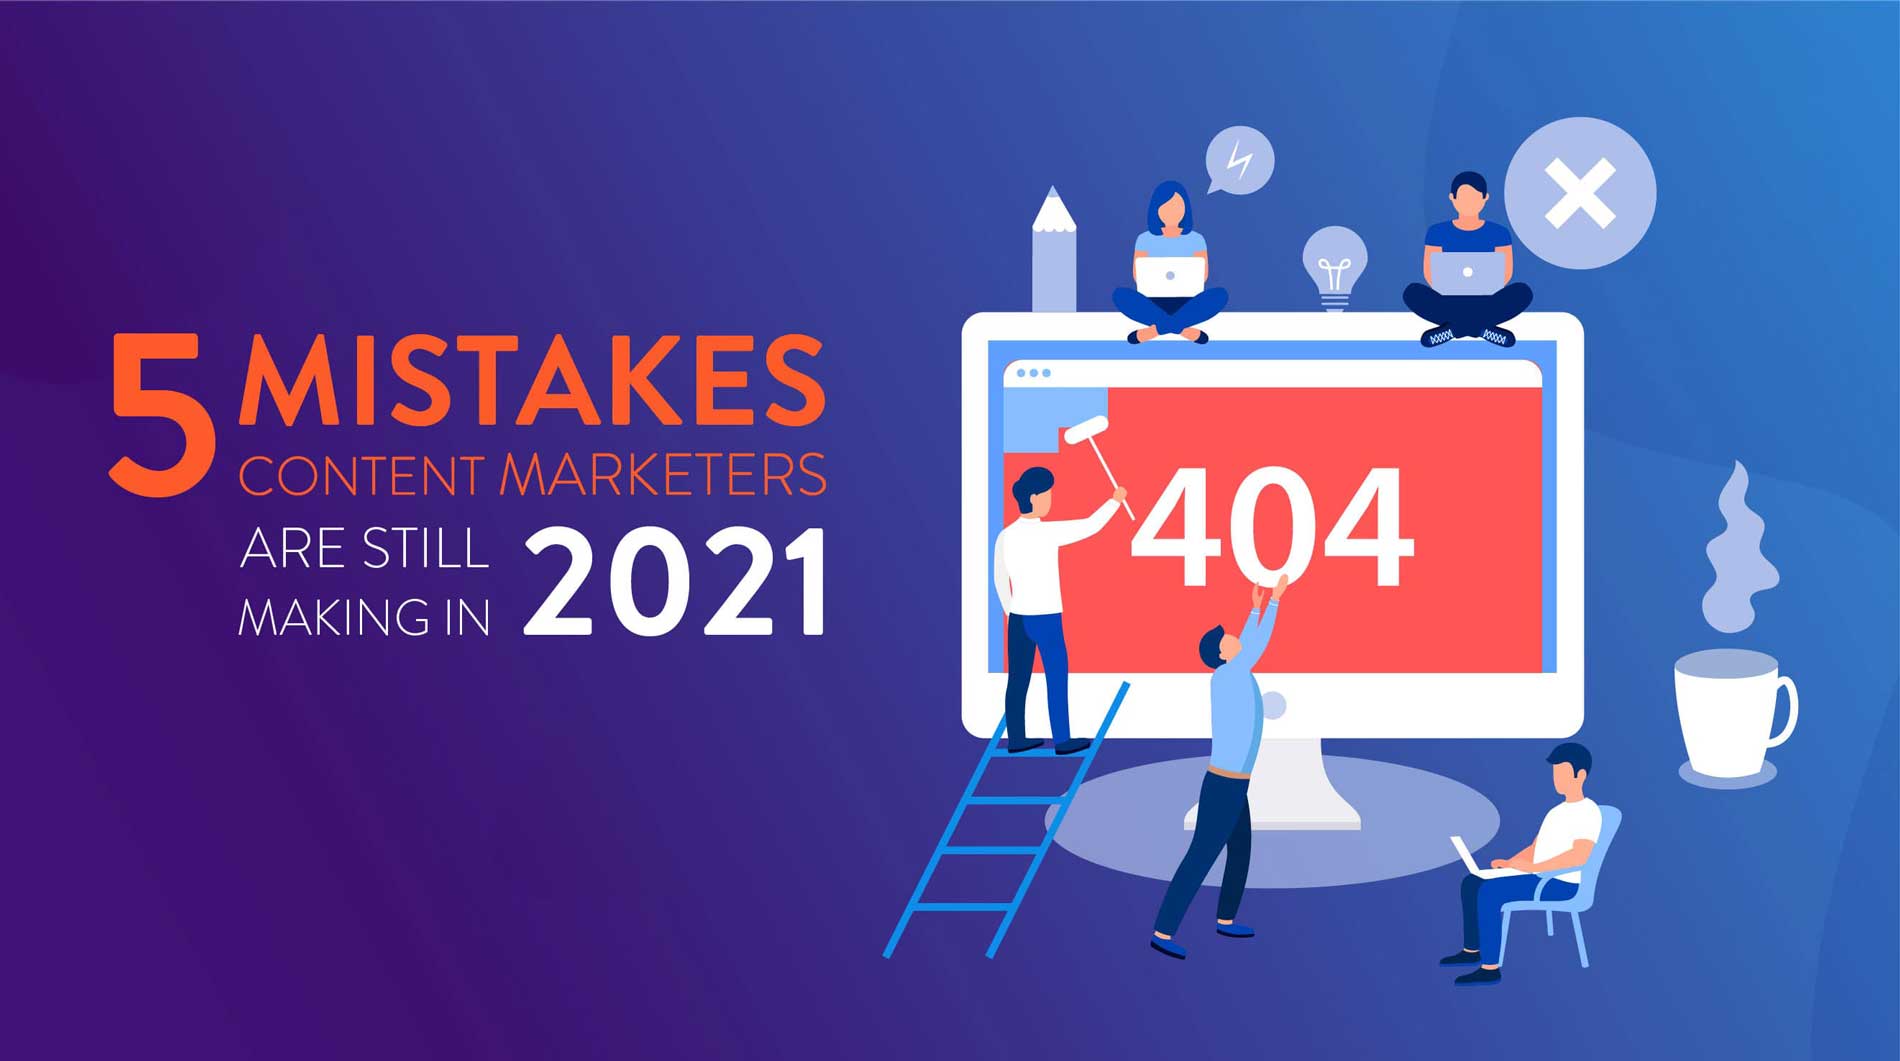 5 mistakes content marketers are still making in 2021